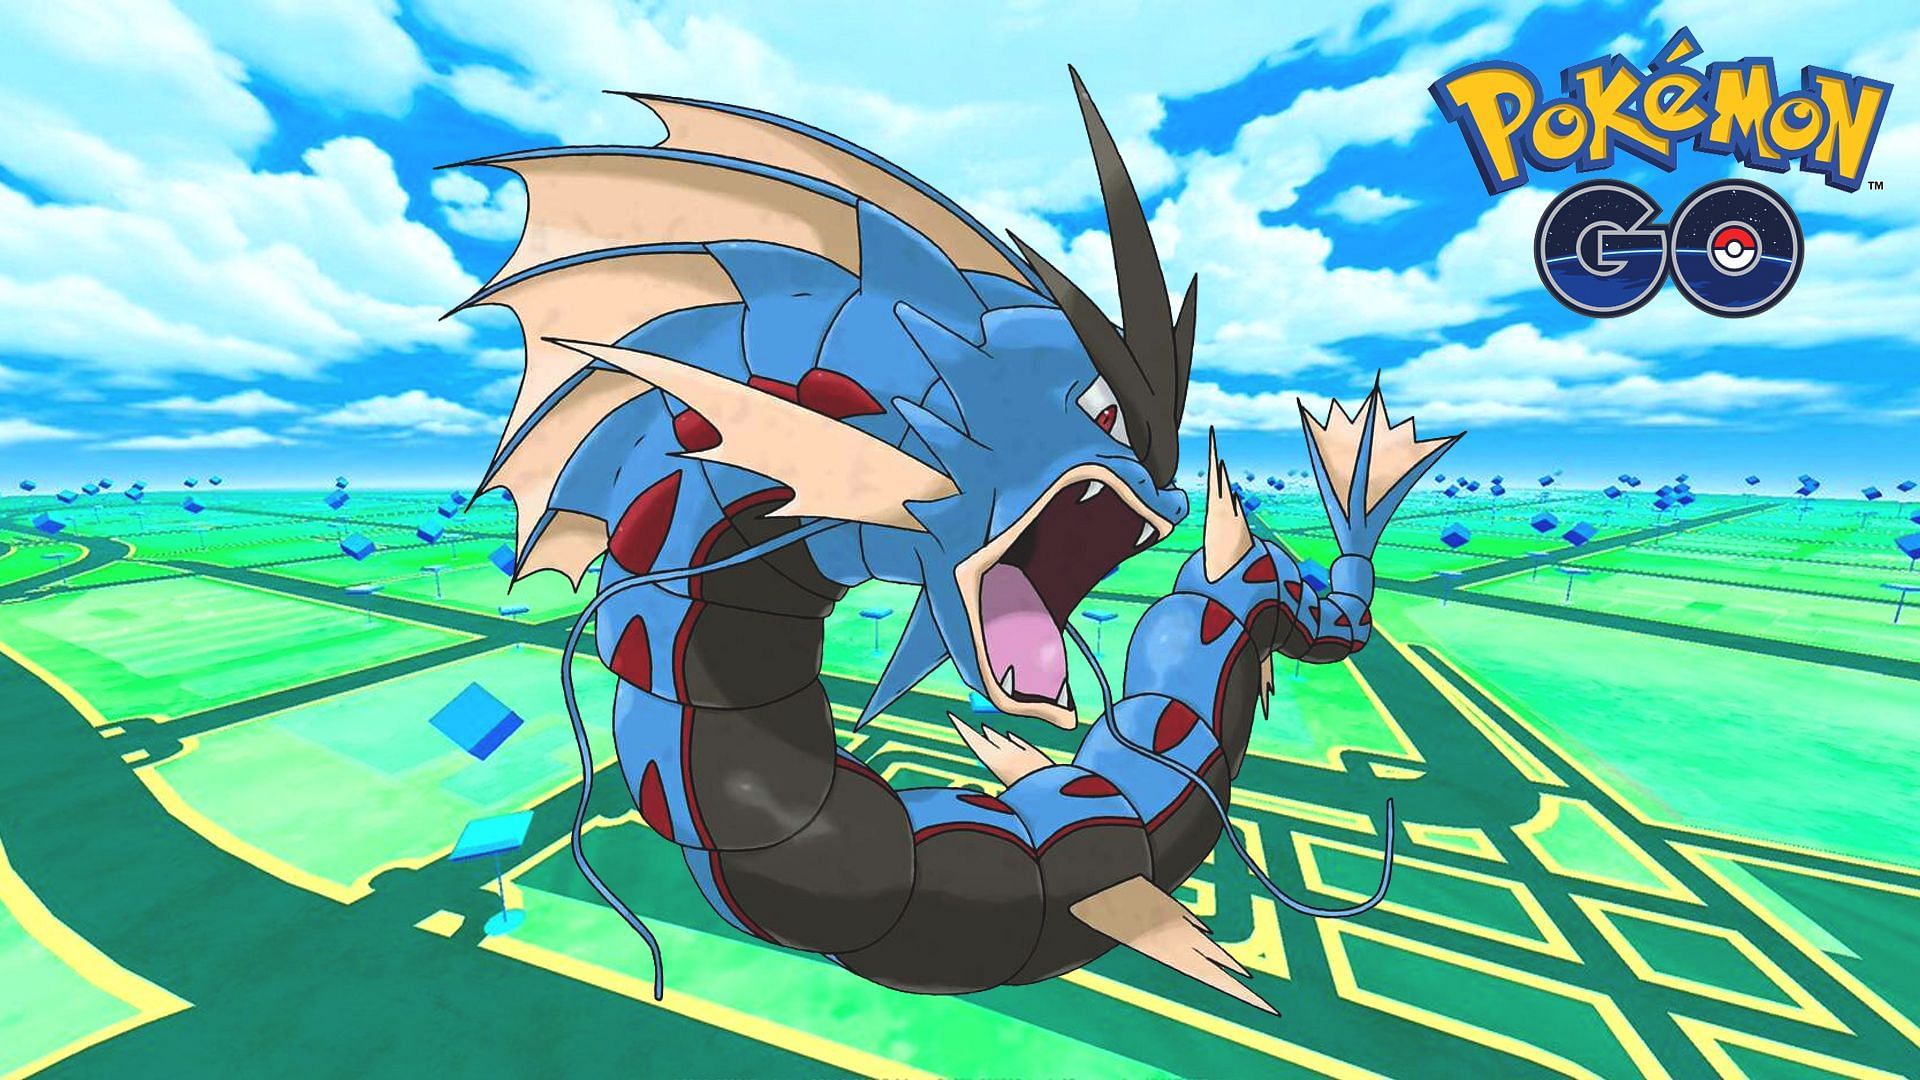 Mega Gyarados (Pokémon GO) - Best Movesets, Counters, Evolutions and CP